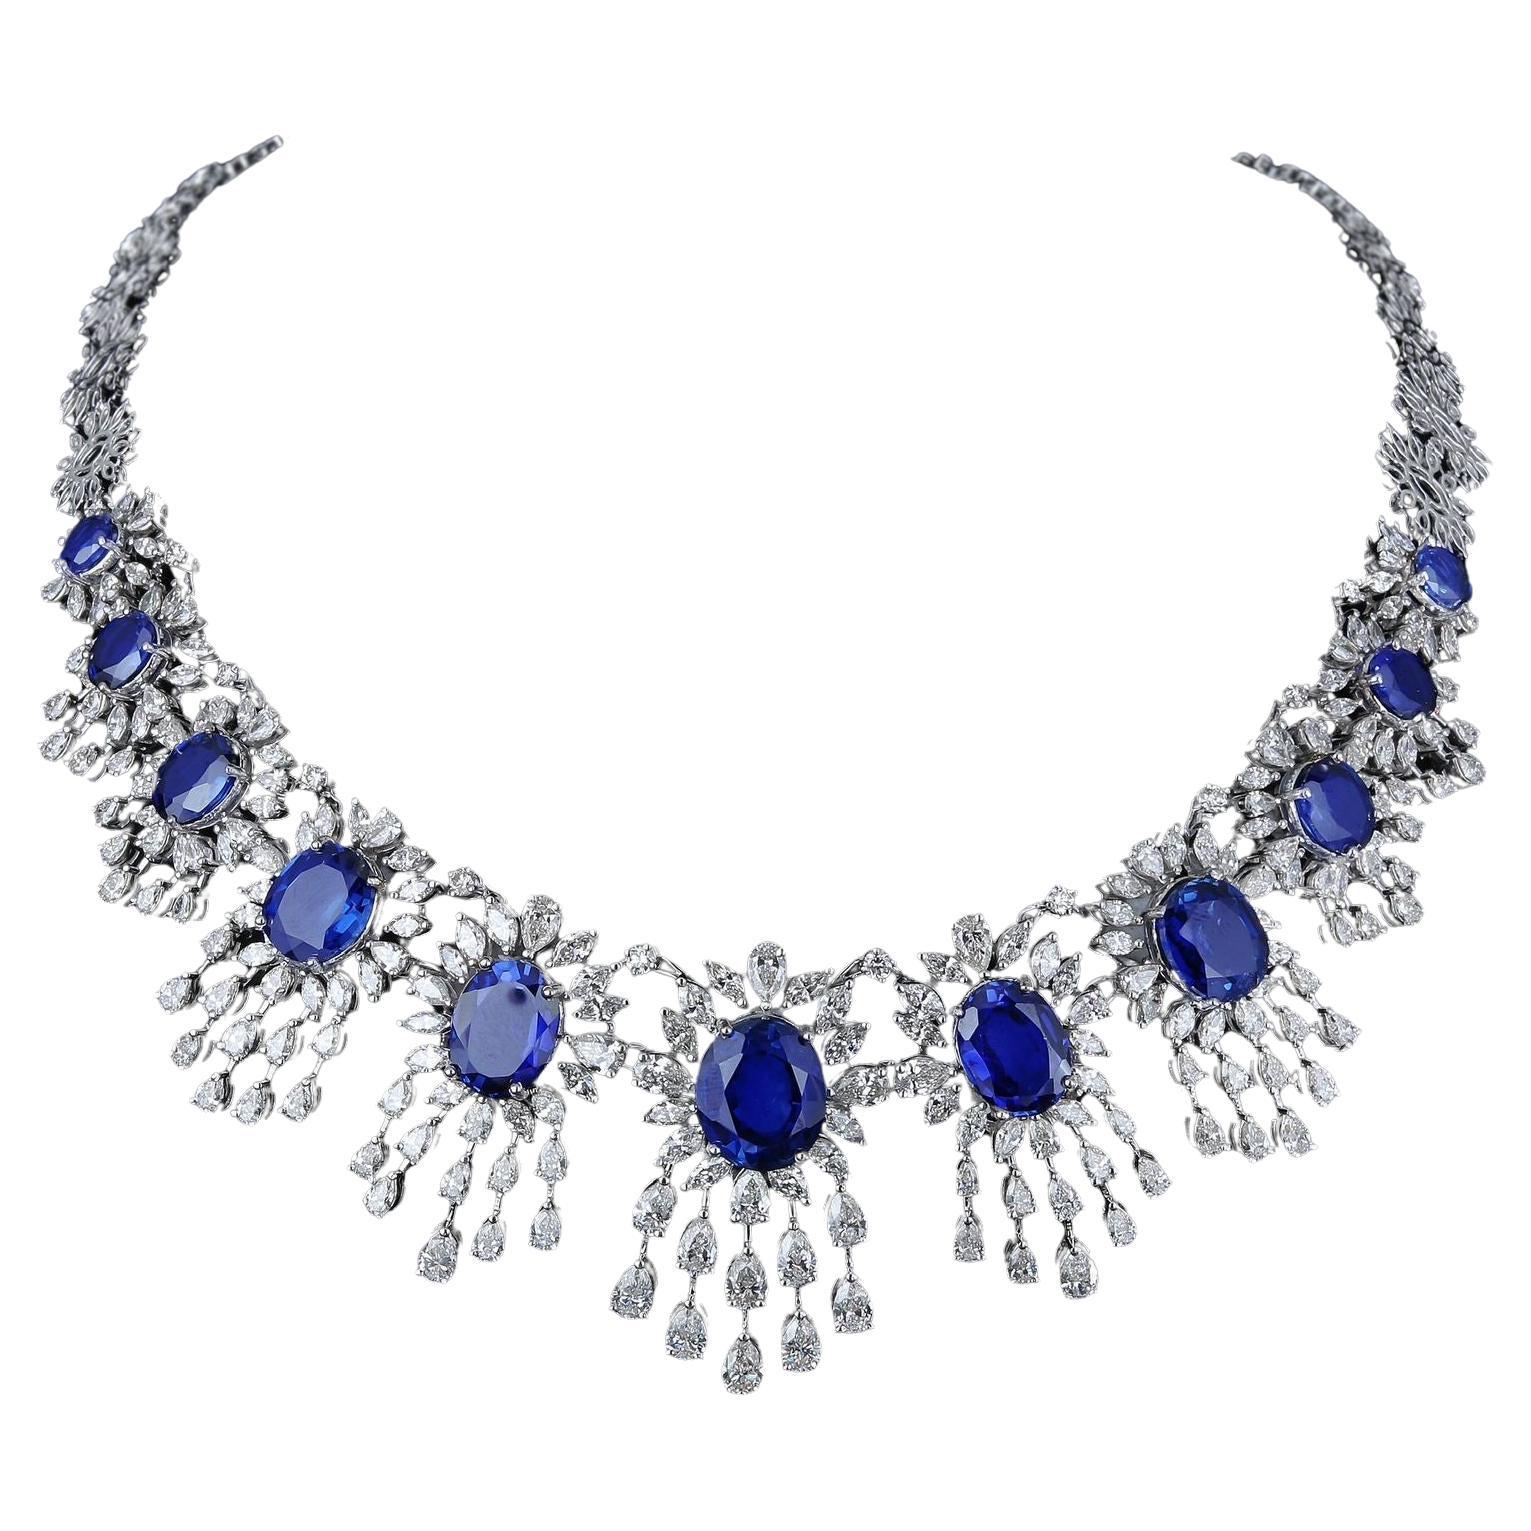 NWT 185, 000 Rare White Gold Gorgeous Fancy Large Blue Sapphire Diamond Necklace For Sale